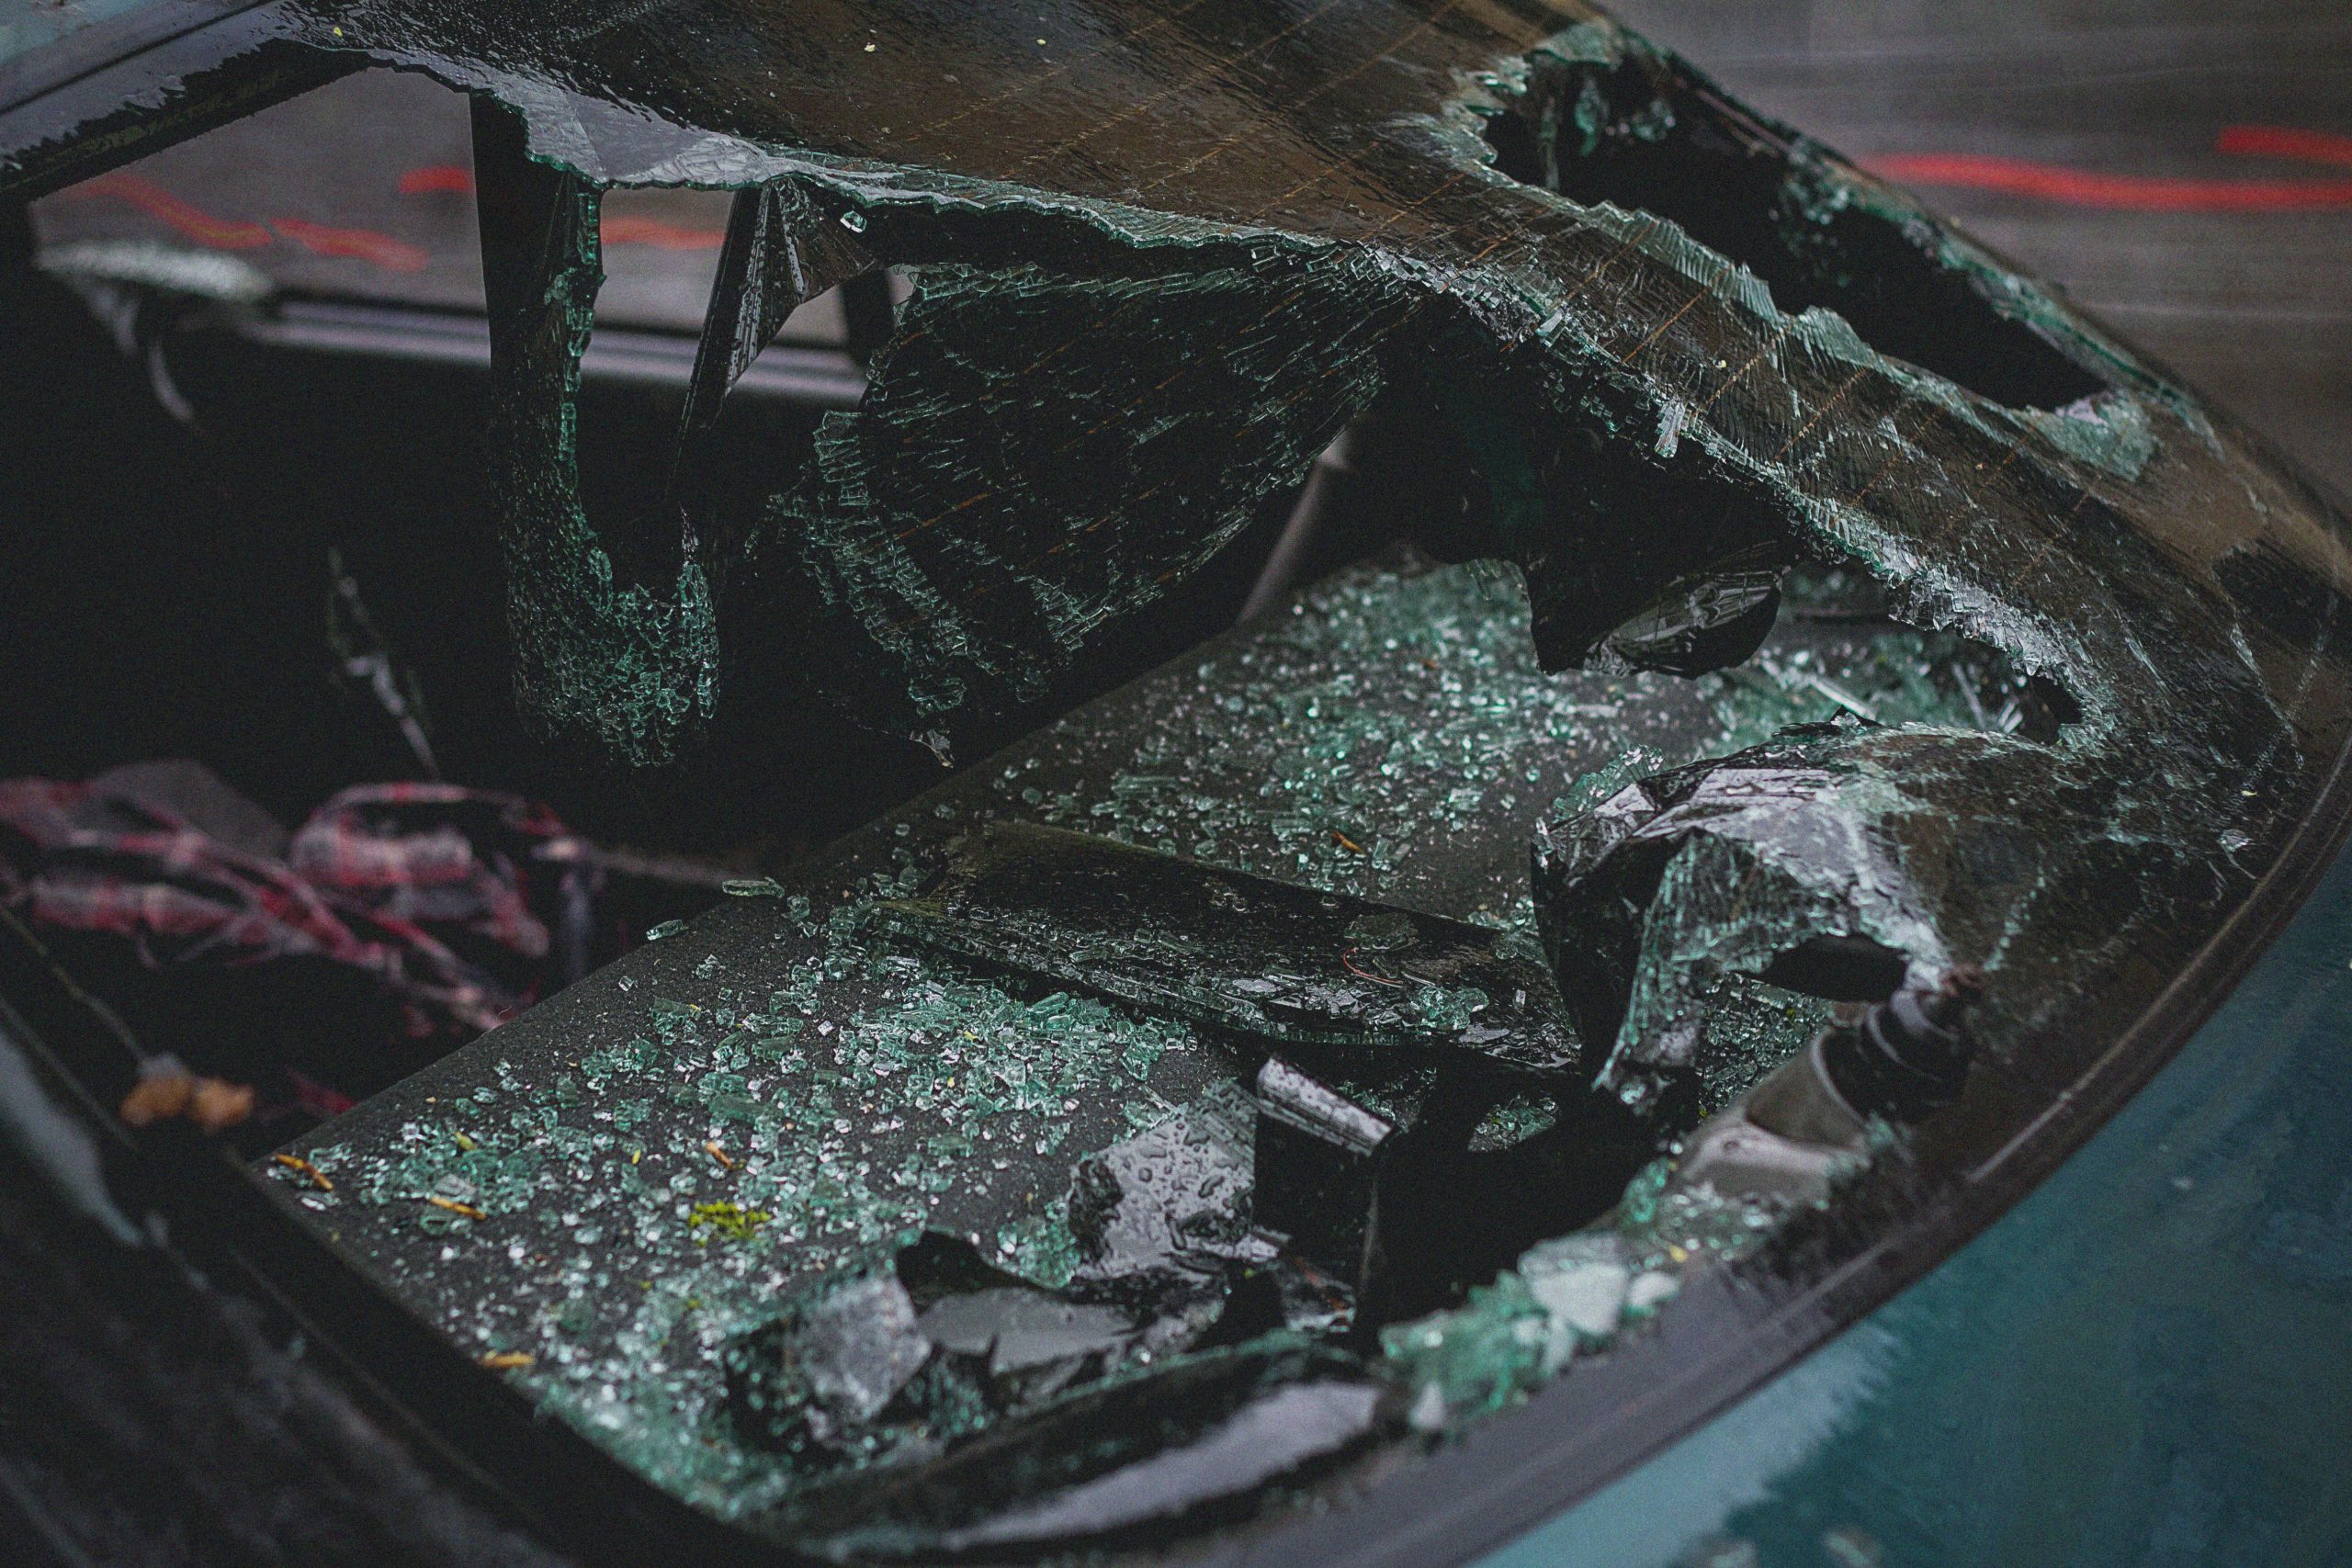 I Crashed a Rental Car Without Insurance. What Now?